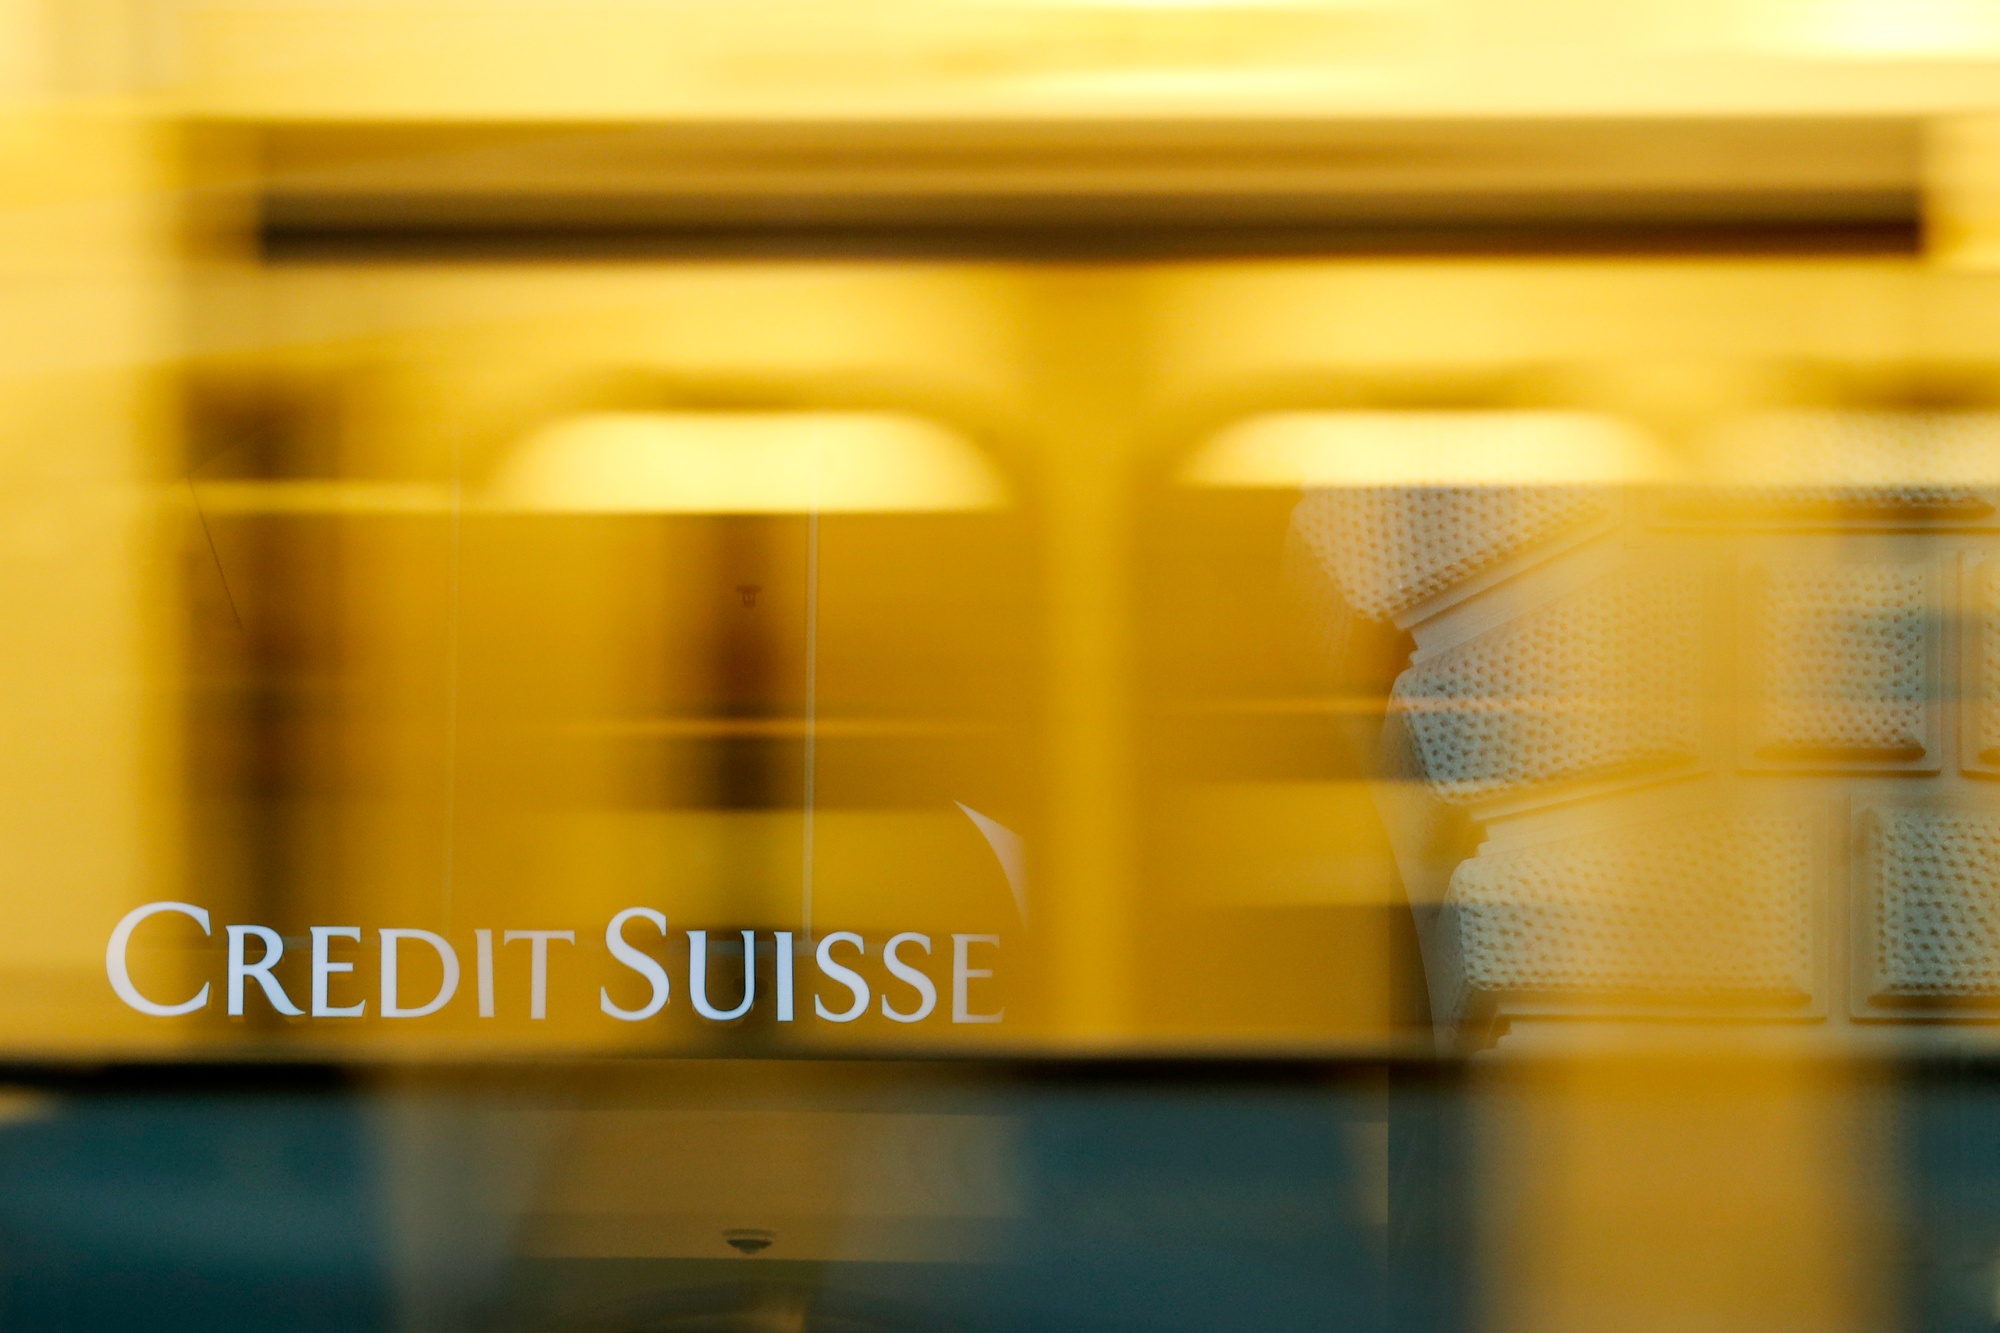 A tram passes Credit Suisse Group headquarters in Zurich.